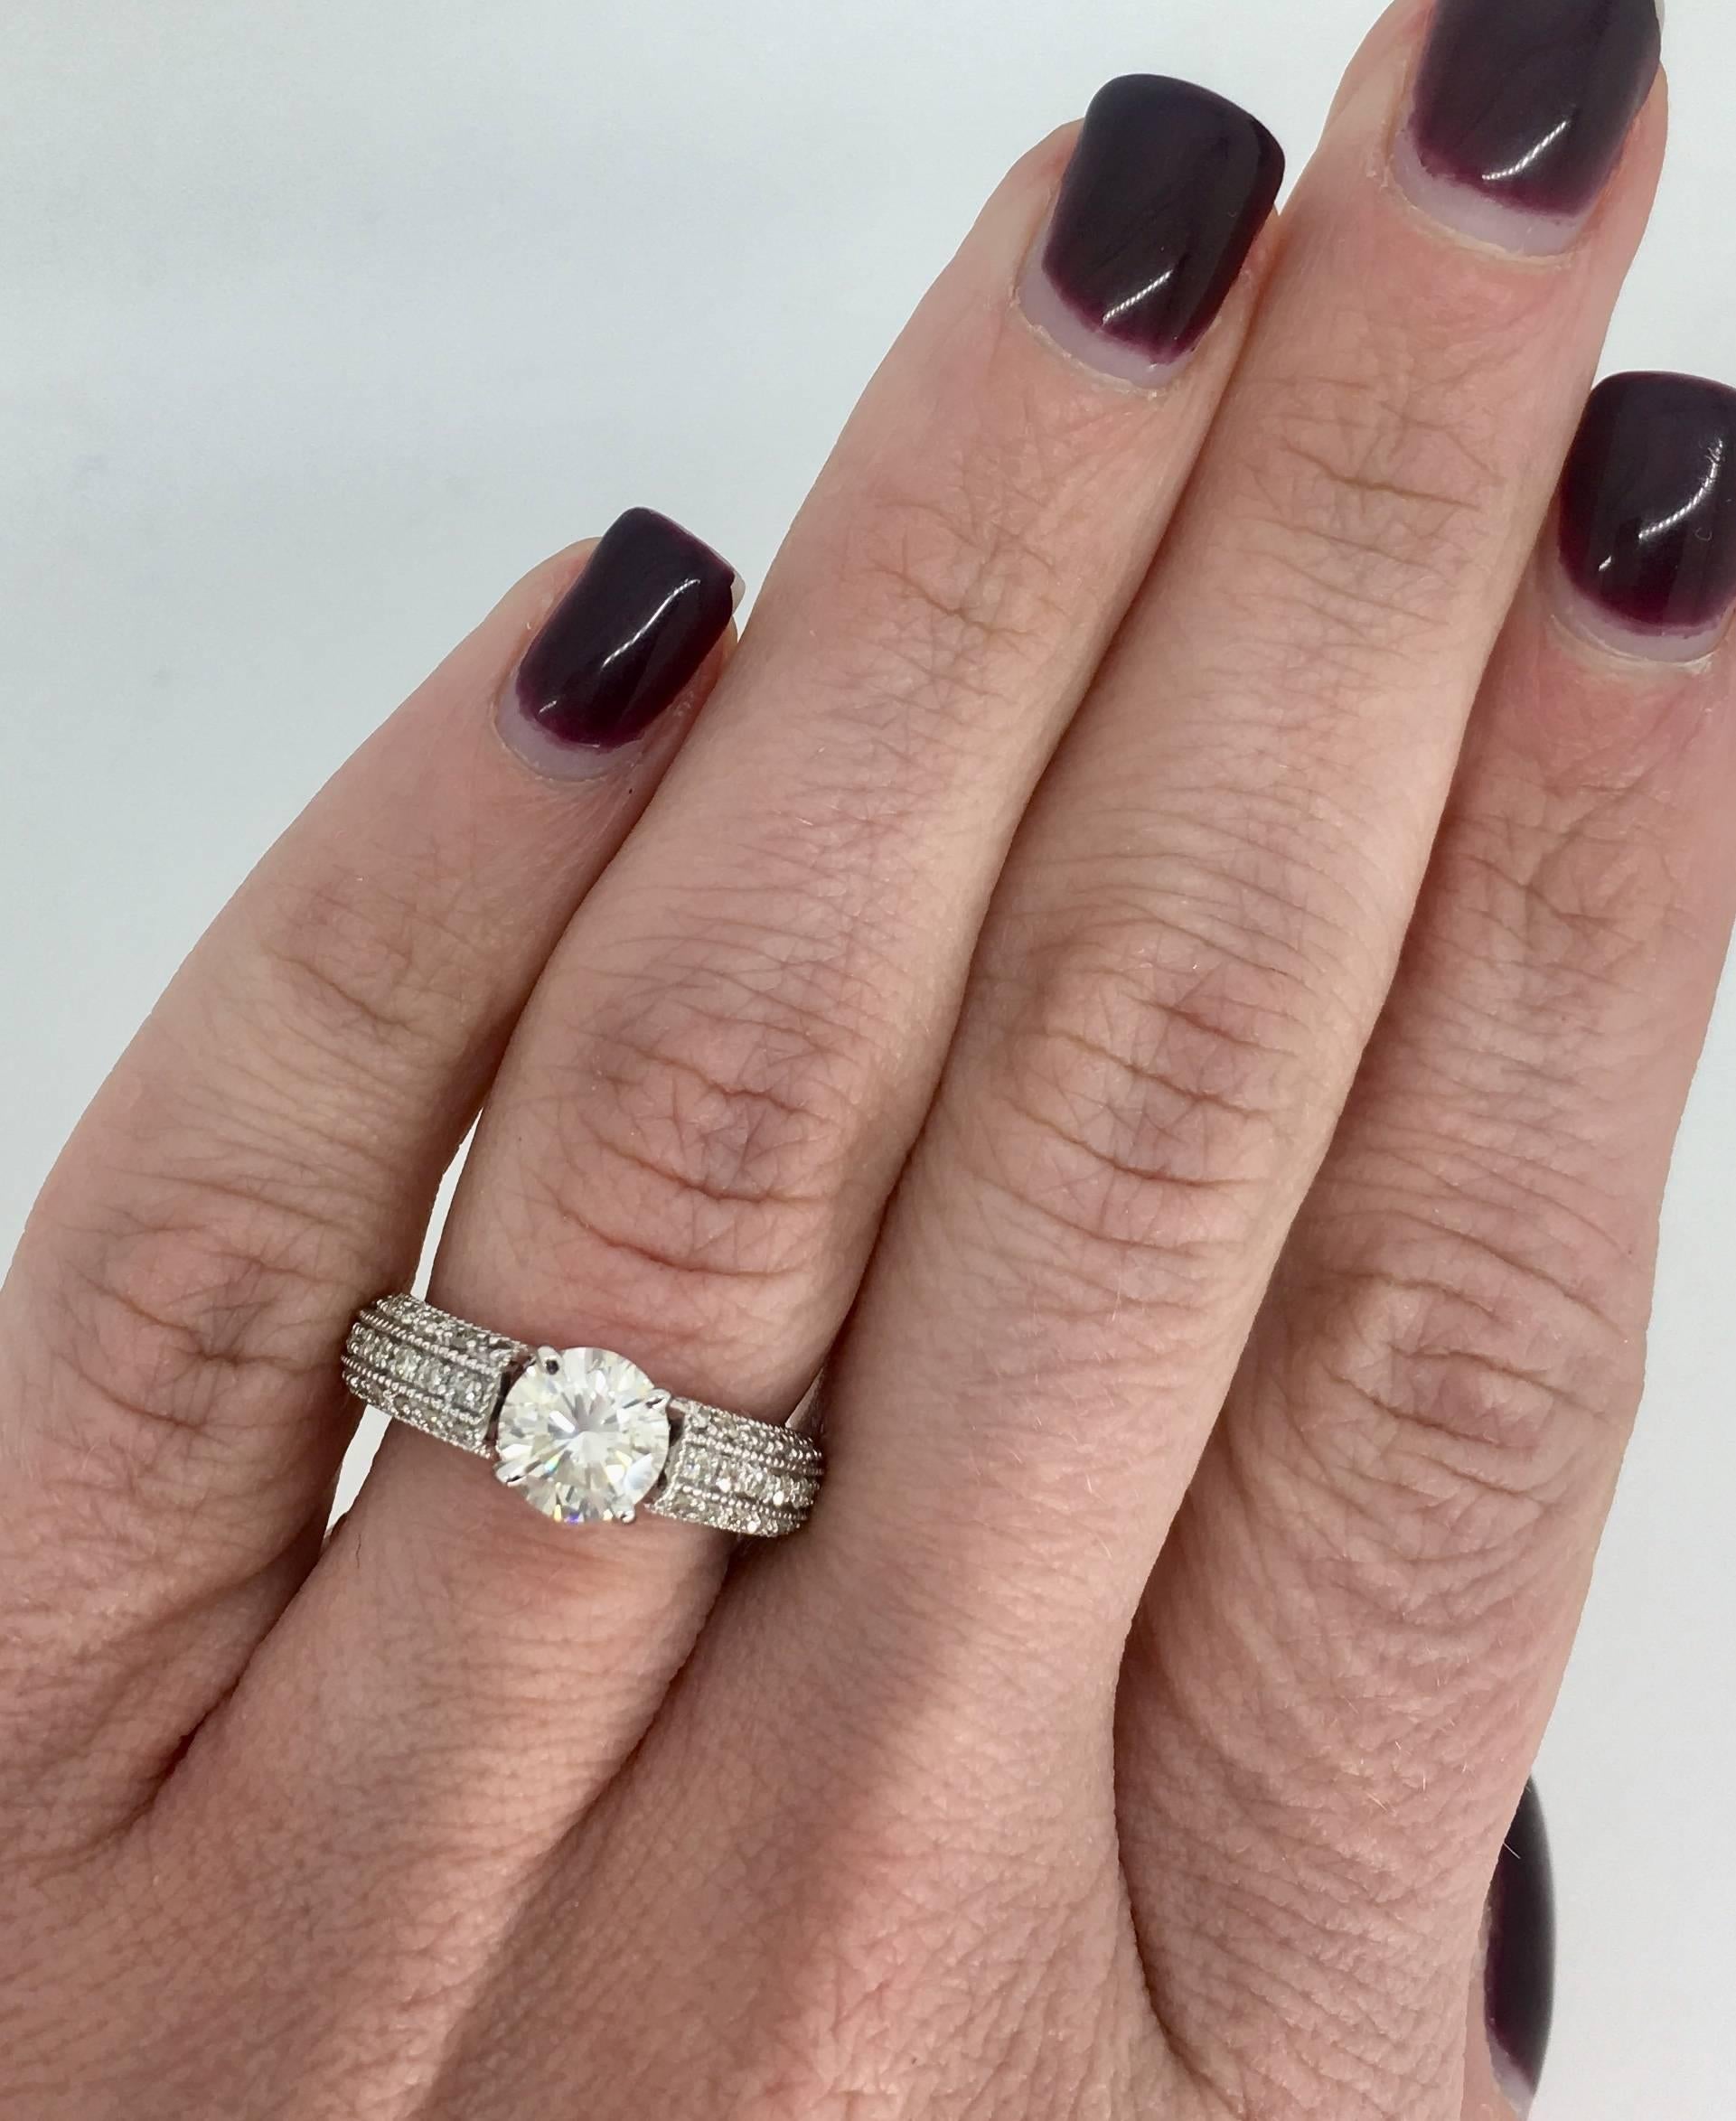 This beautiful ring features a 1.04CT Round Brilliant Cut Diamond that displays L color and SI2 clarity; the clarity grade of the diamond is based on the cloud inclusions present. There is an additional .42CTW of Round Brilliant Cut Diamonds set